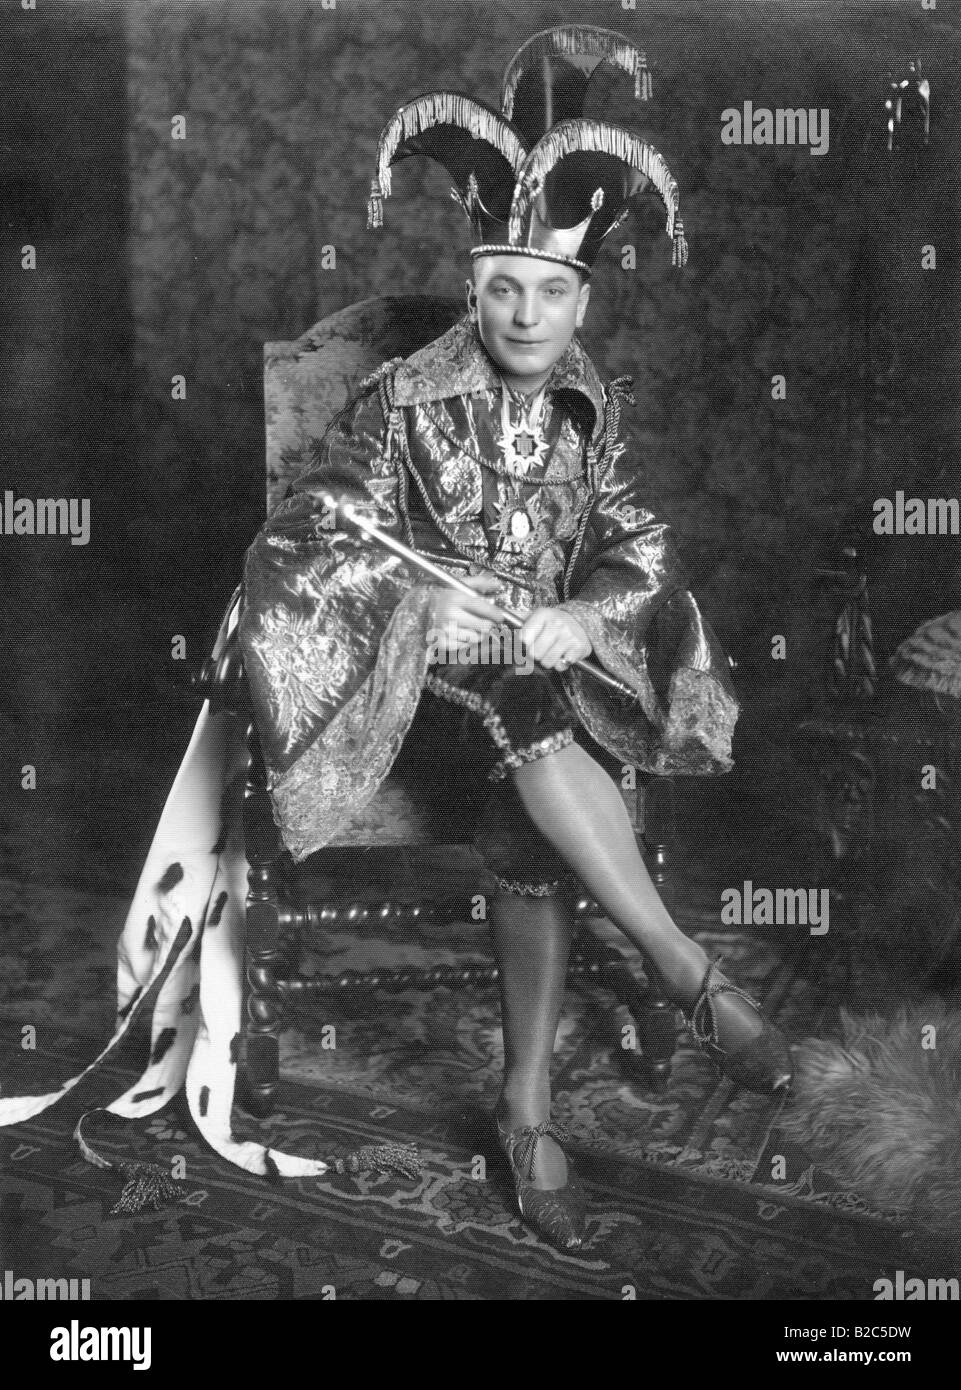 Man dressed up as king, historic picture from about 1920 Stock Photo